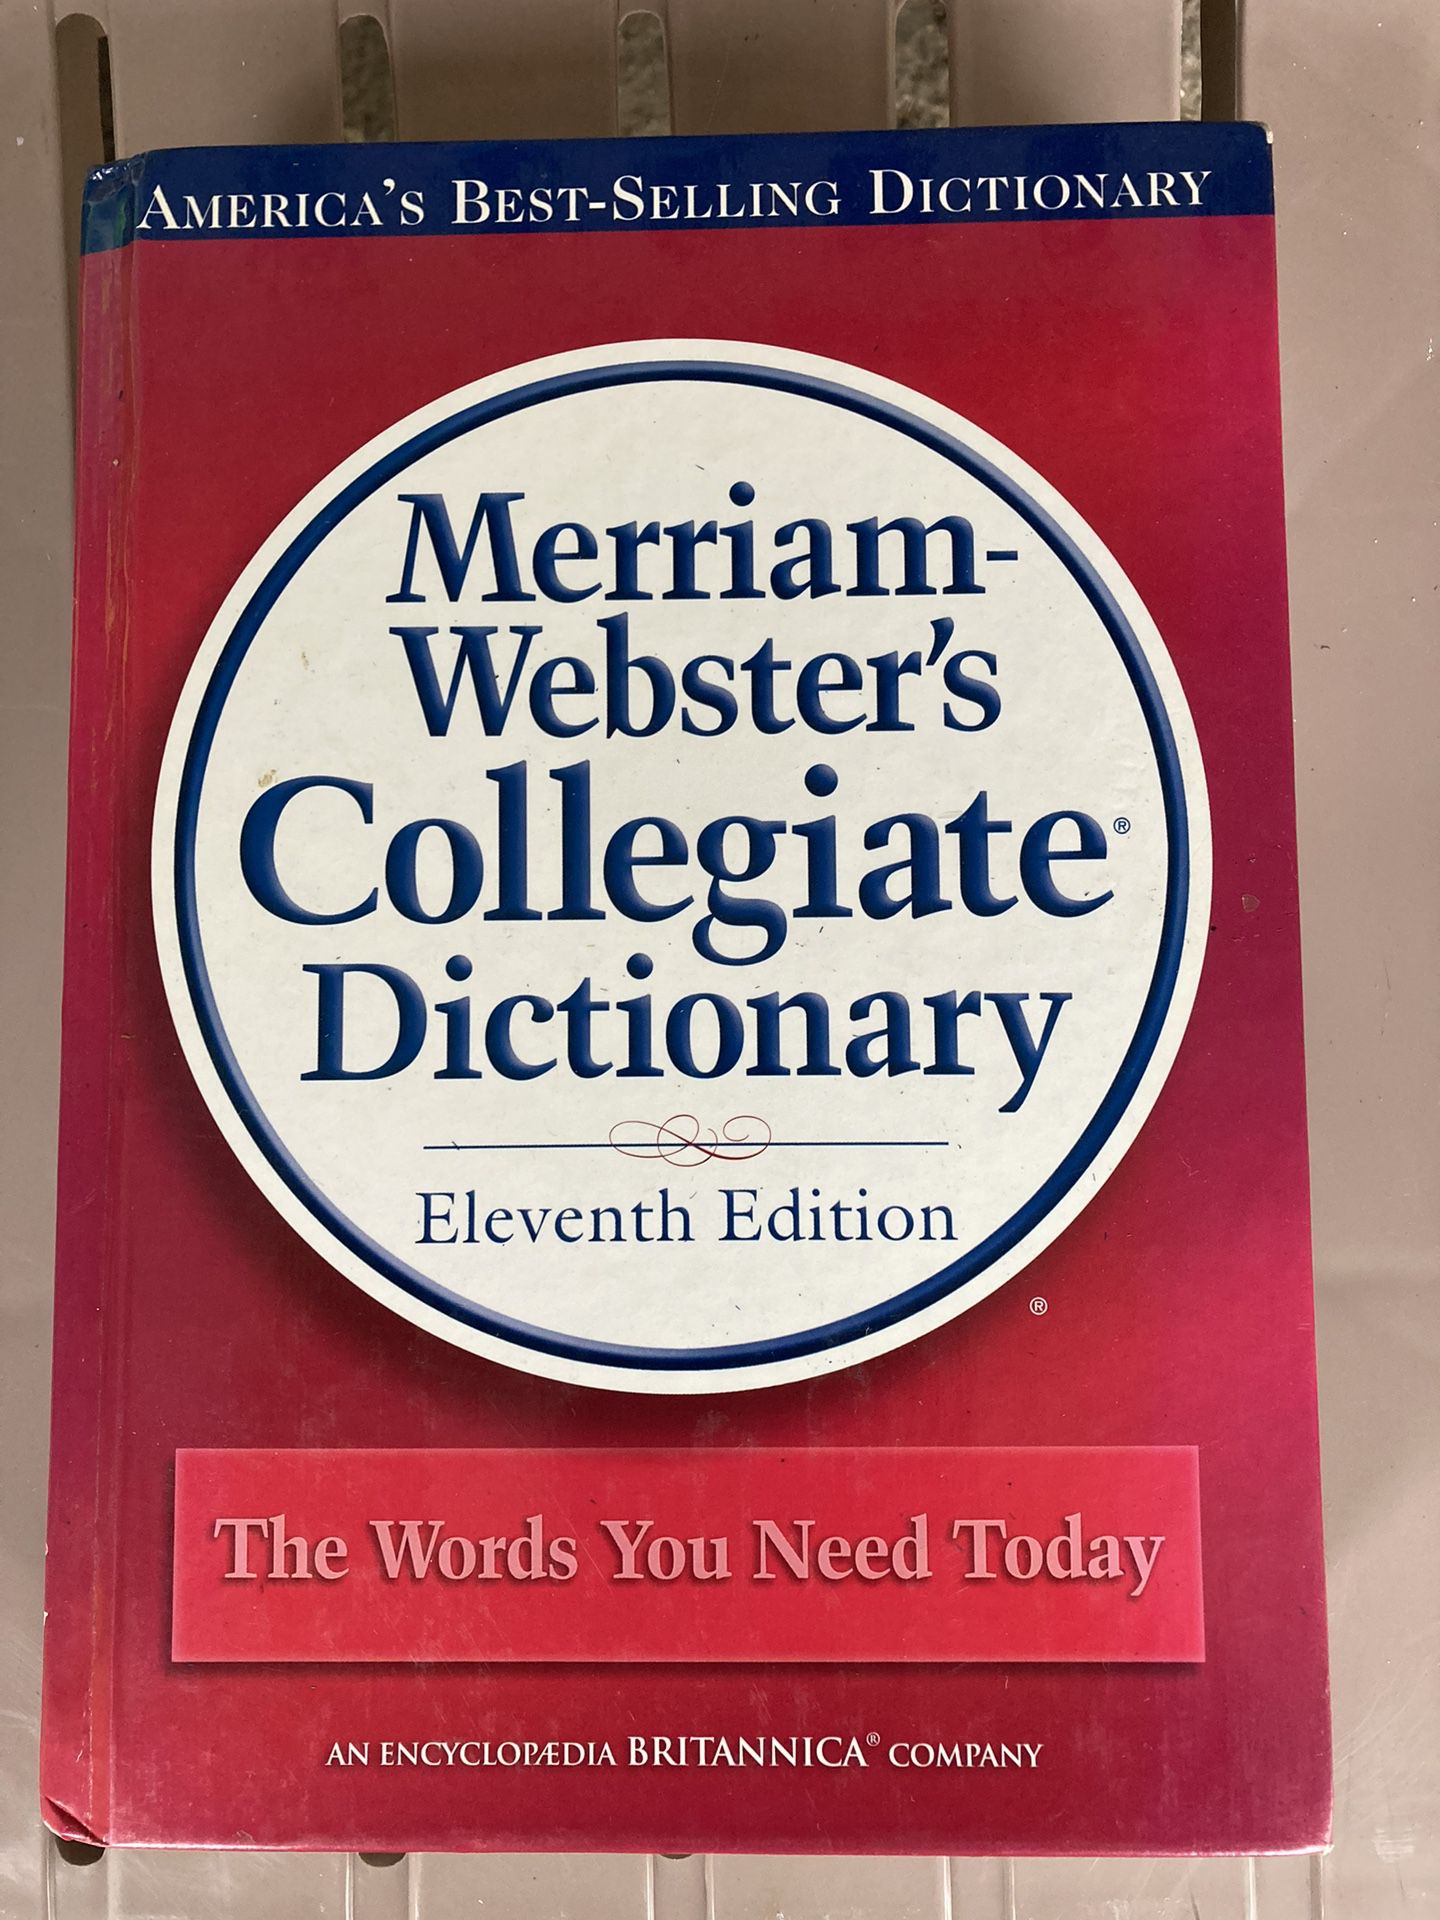 MERRIAM-WEBSTER’S COLLEGIATE DICTIONARY (11th Edition)